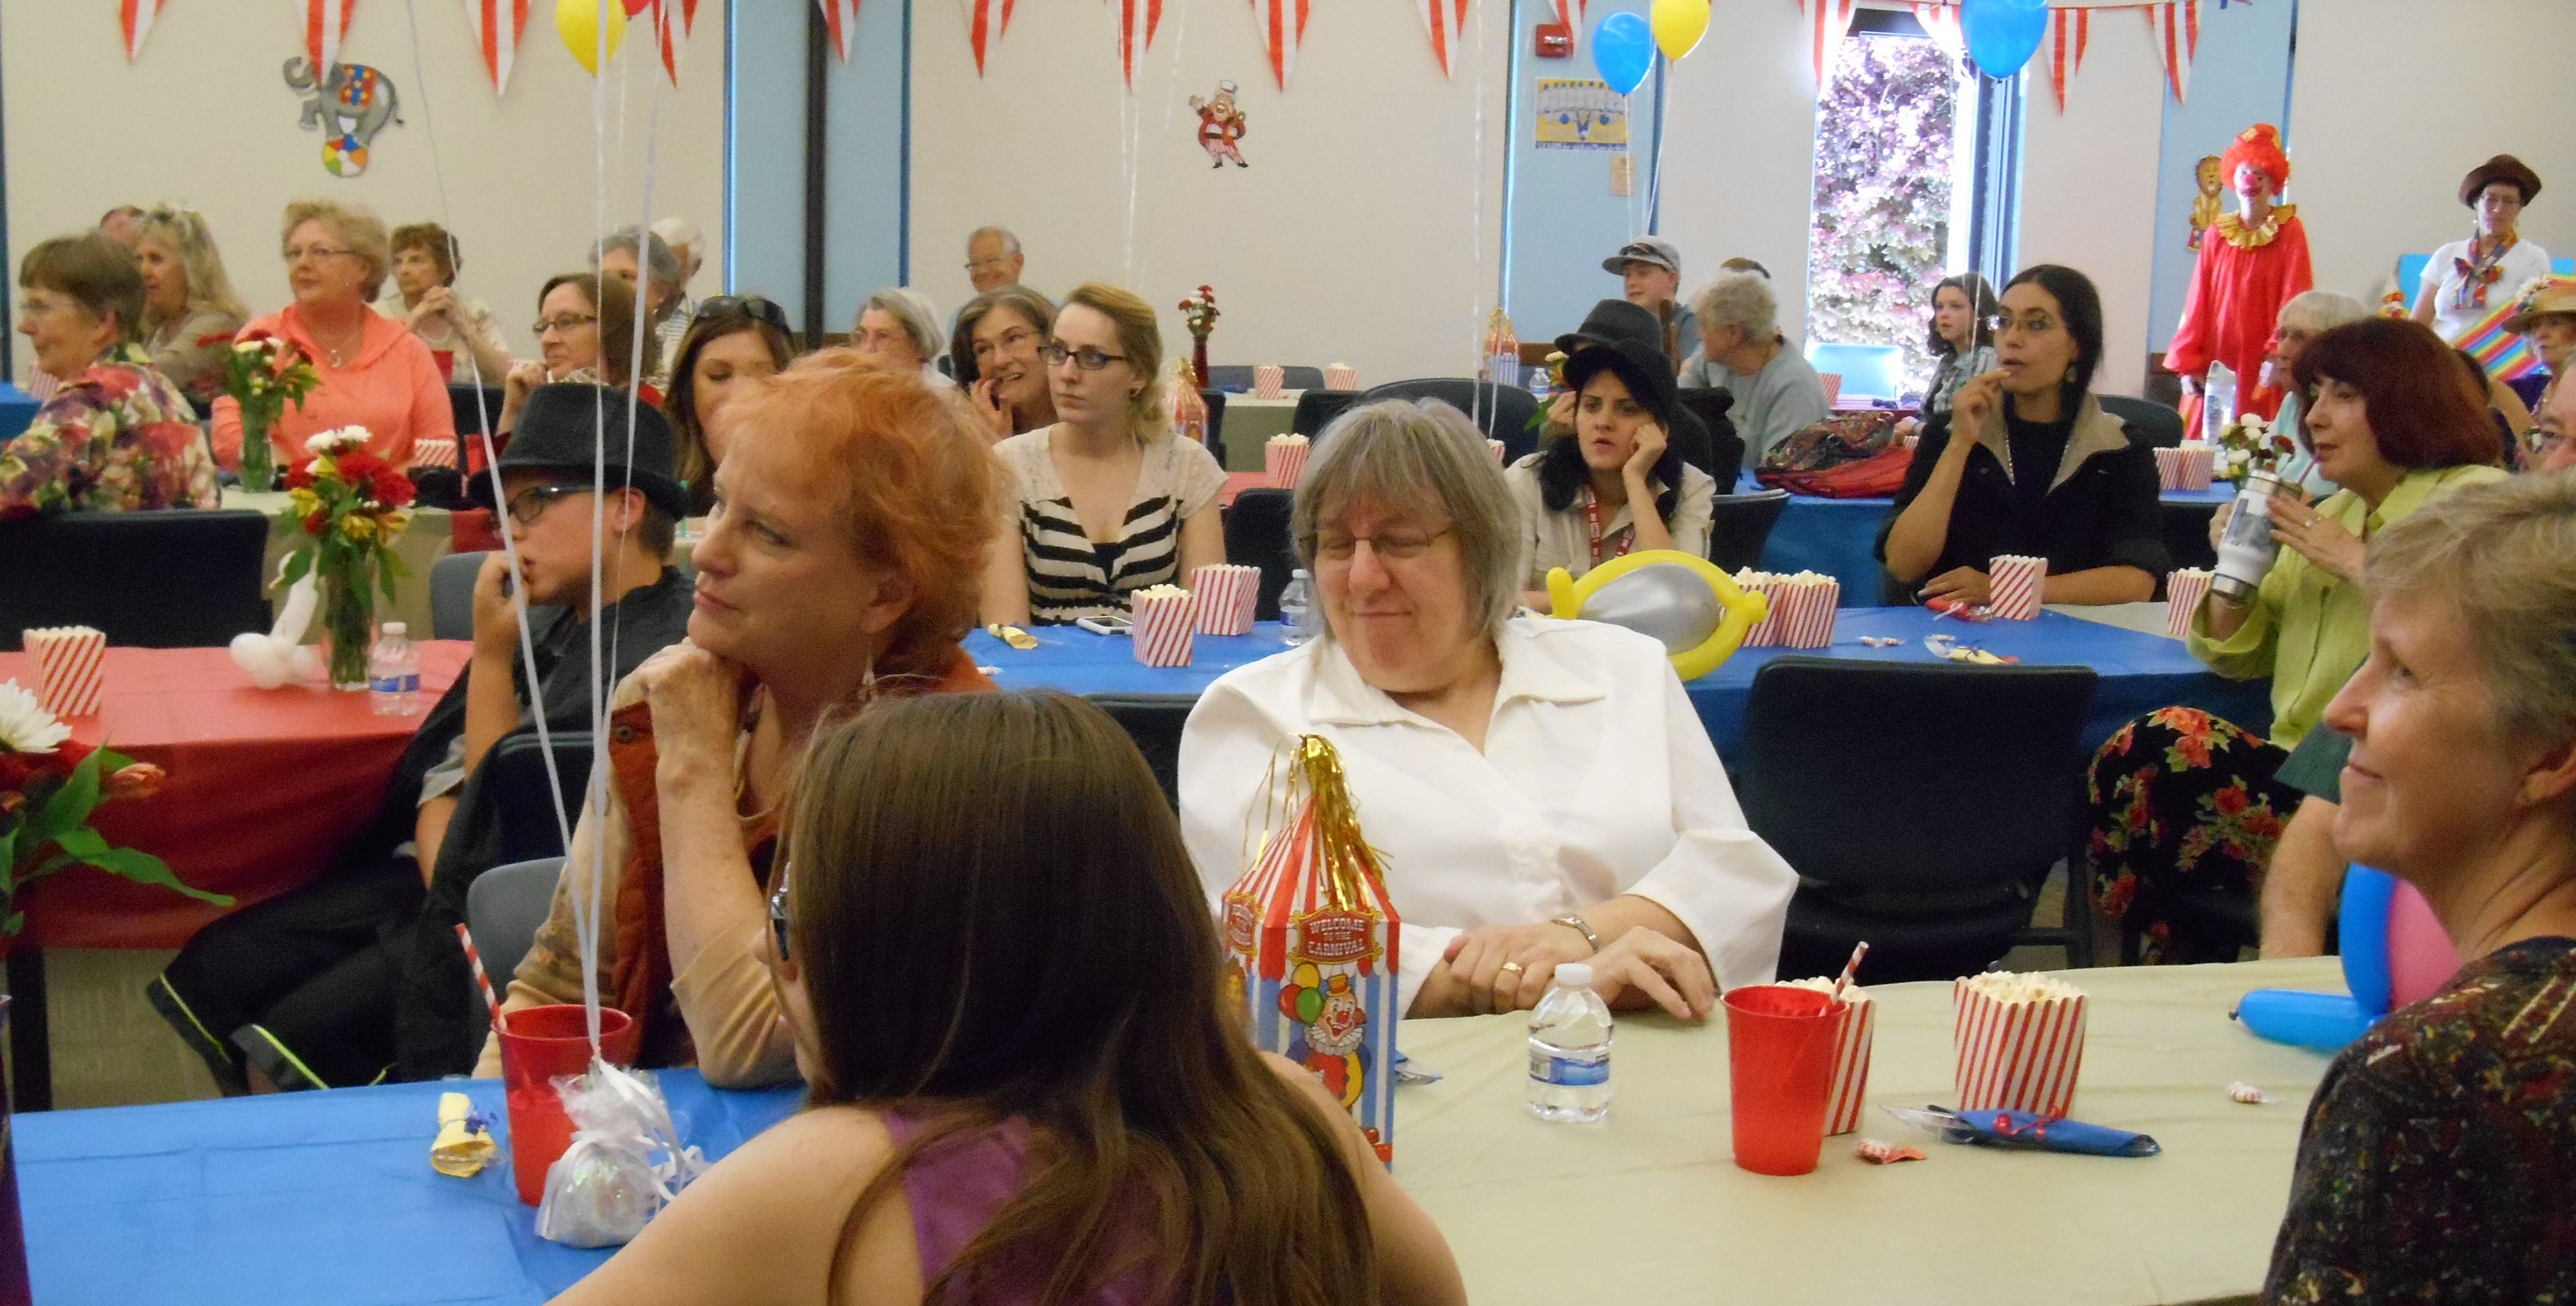 Library staff and volunteers clowning around at the 2015 library volunteer appreciation event.